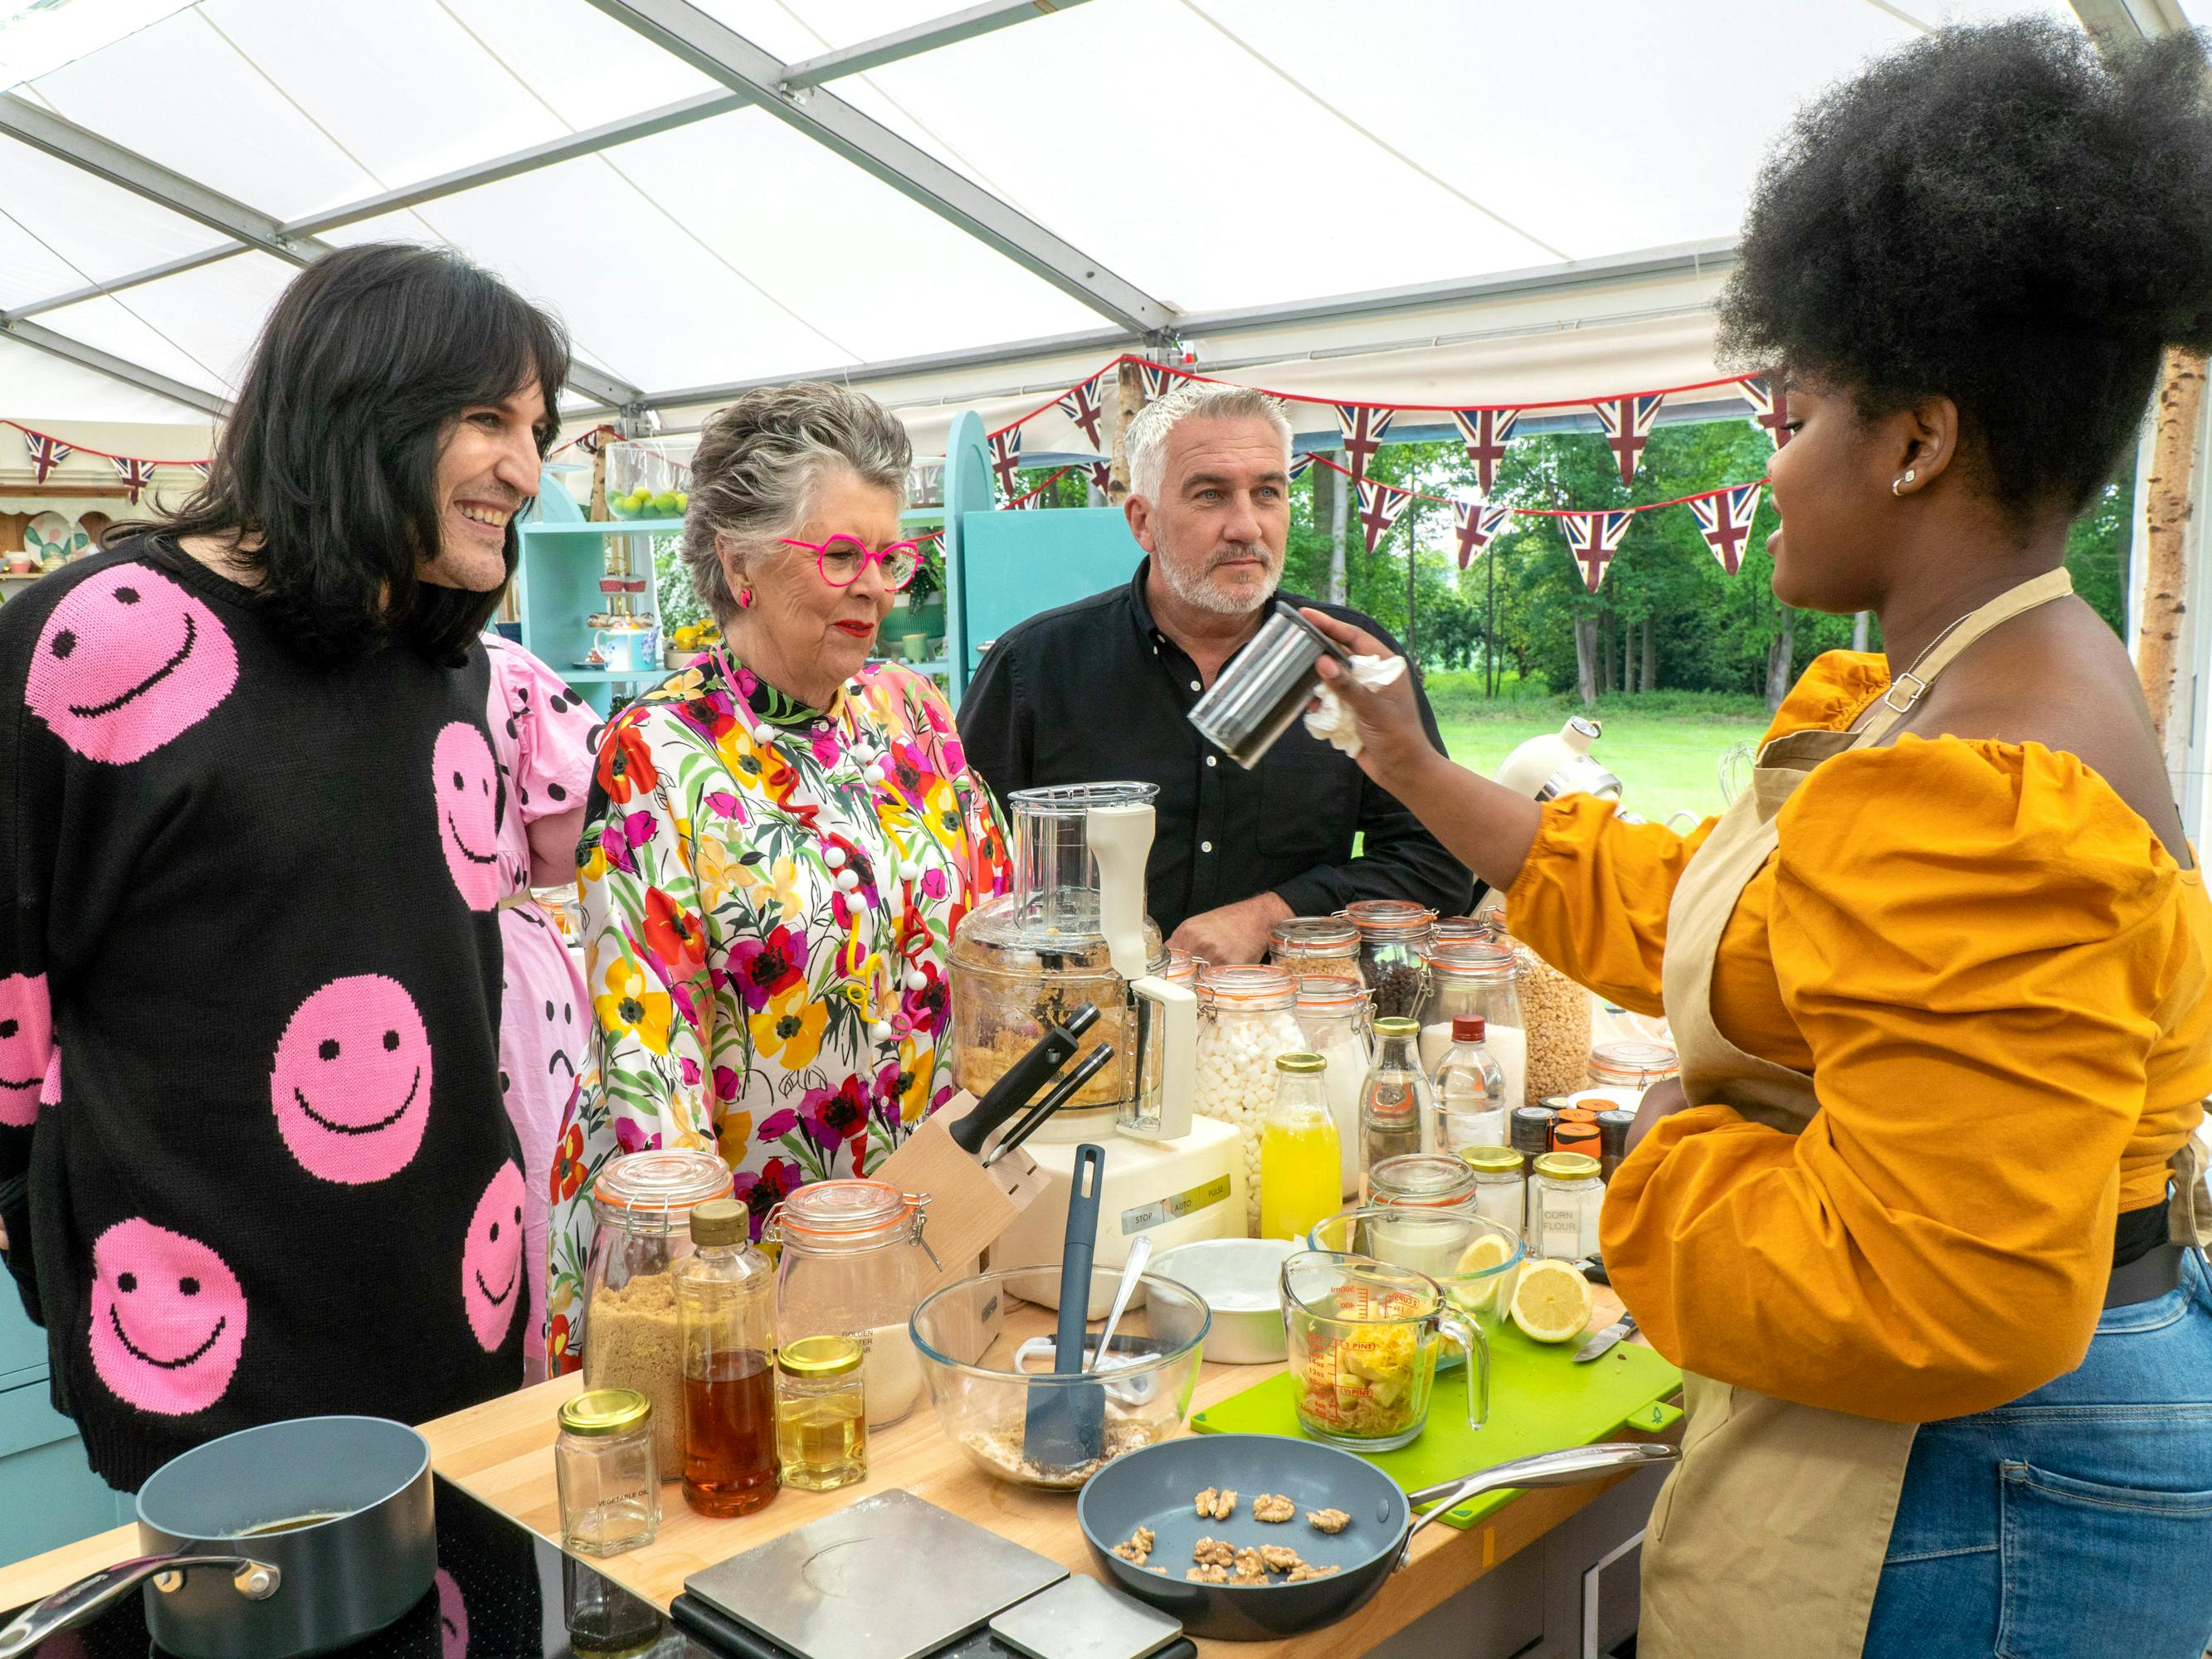 Noel Fielding, Mary Berry, Paul Hollywood, and contestant Rochica stand around a prep counter in the famed tent of The Great British Baking Show.